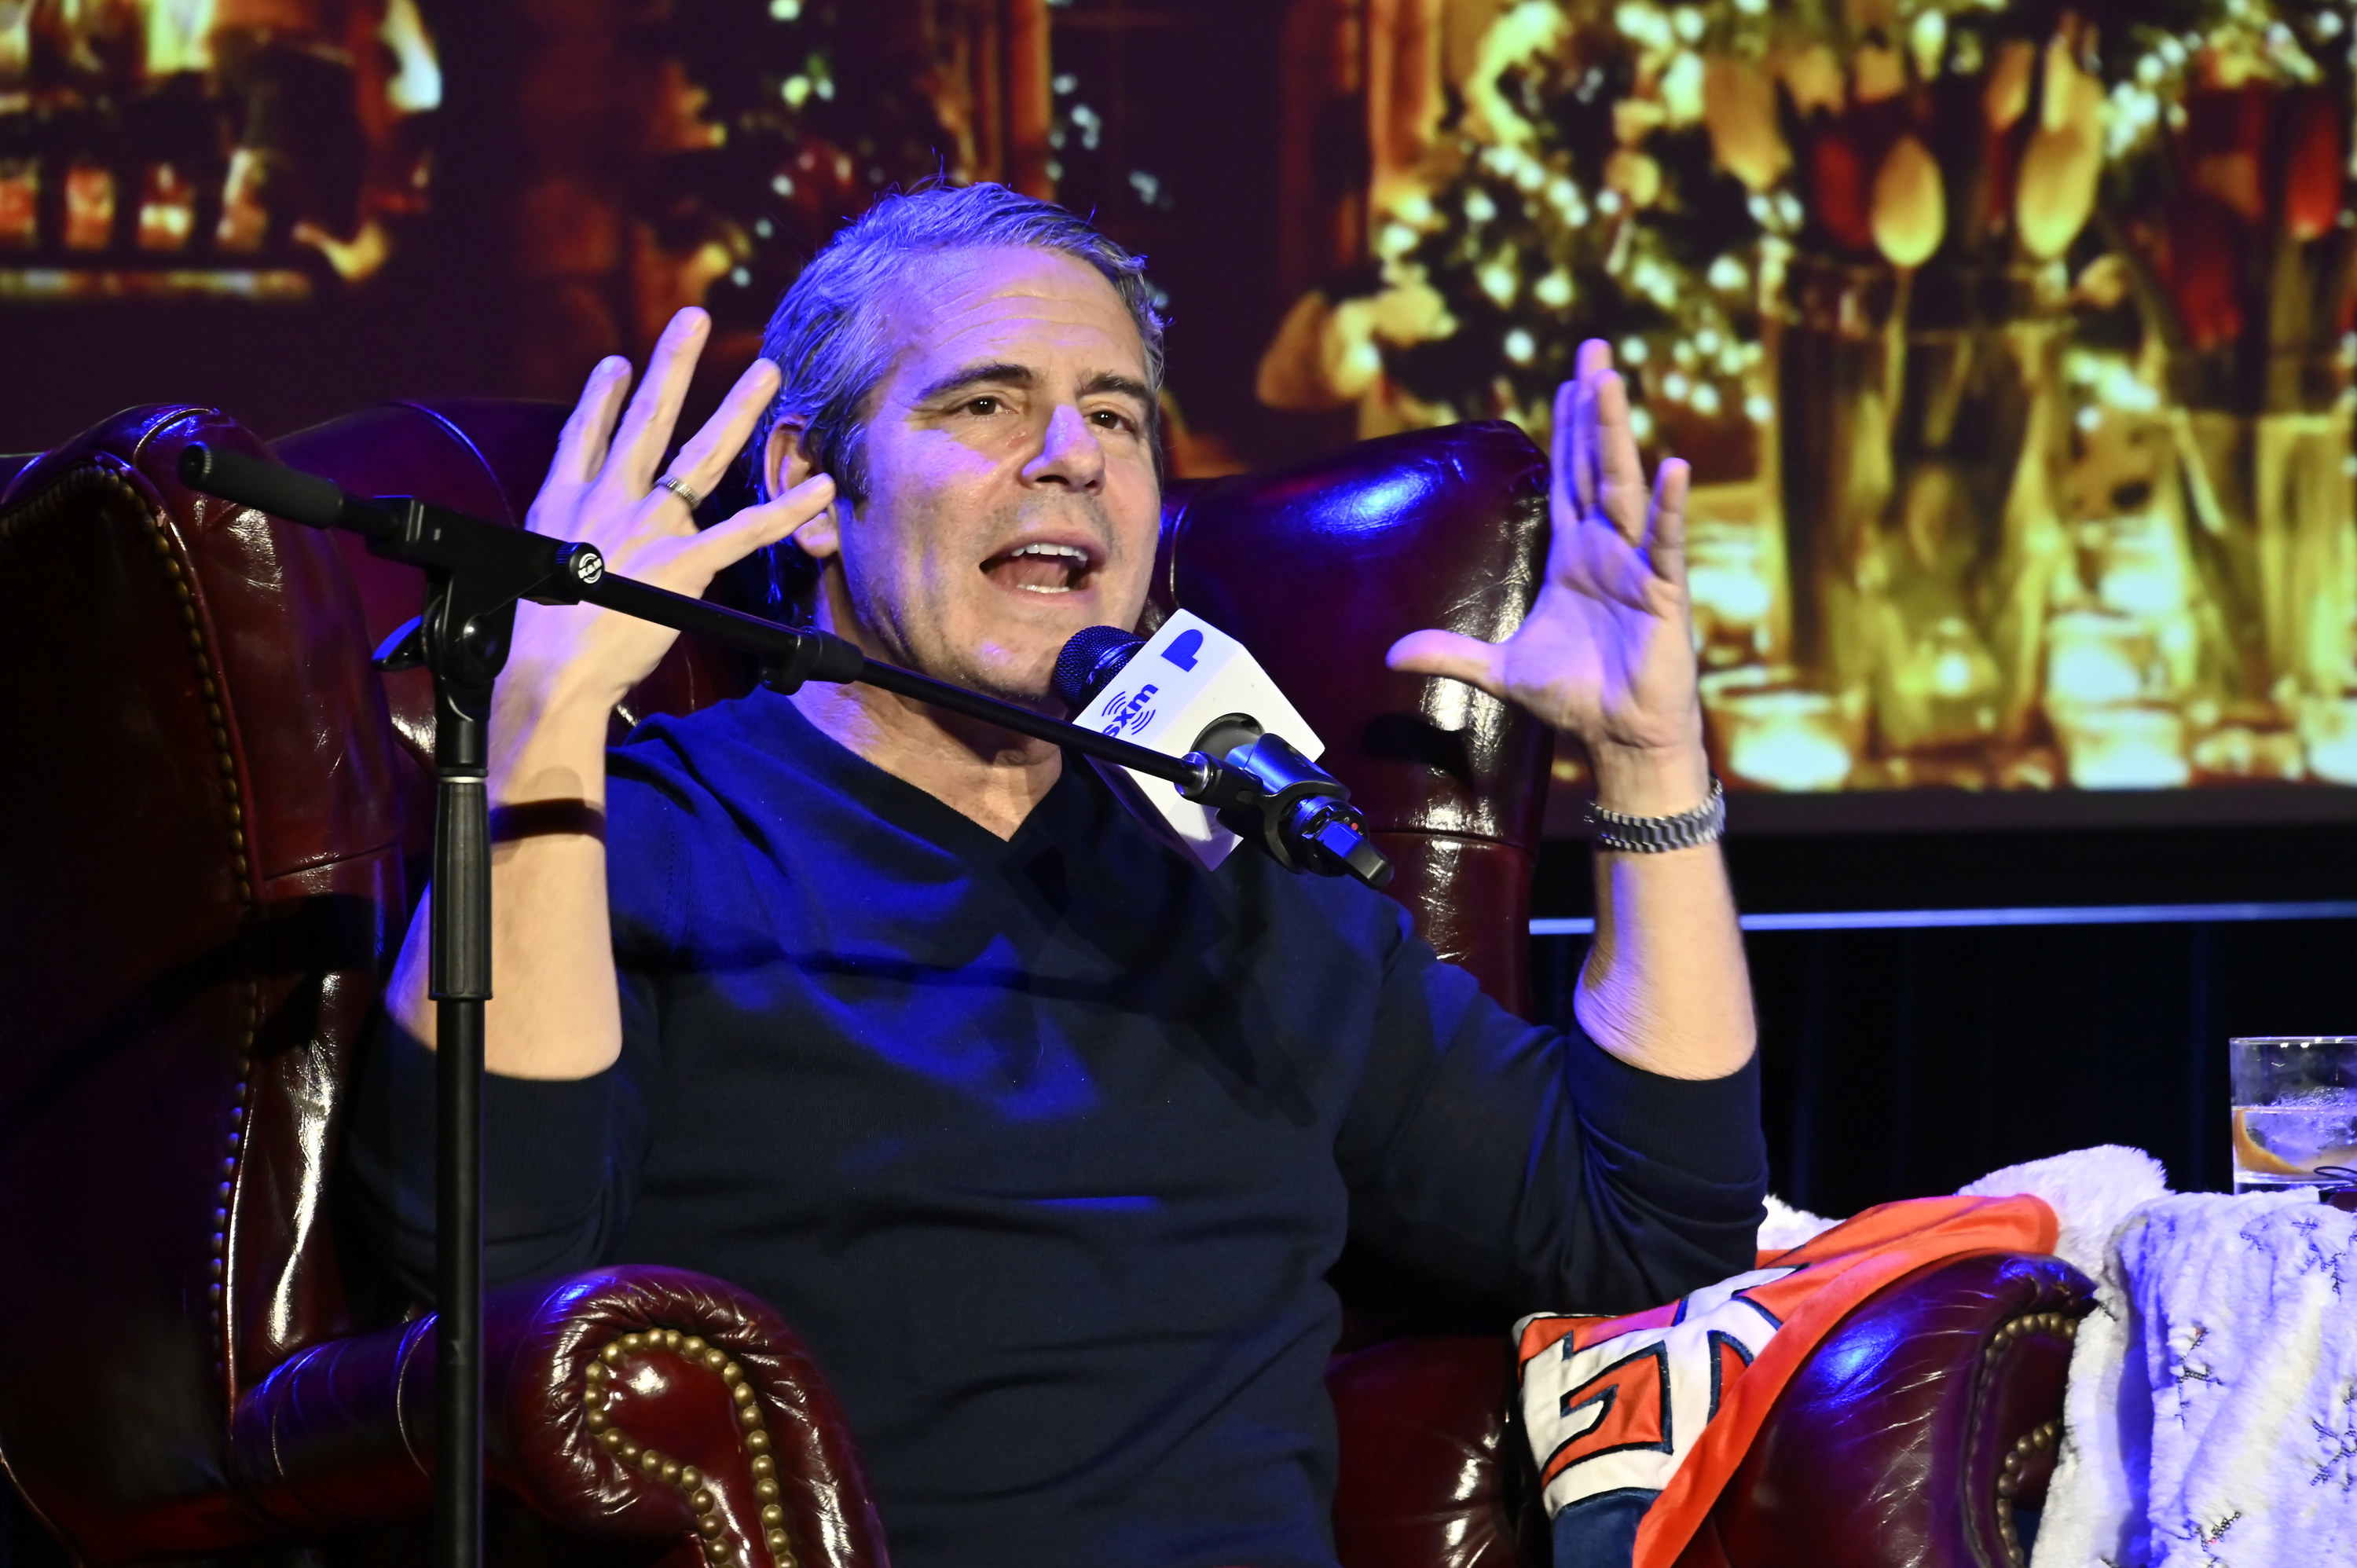 Andy Cohen talking and gesturing with his hands